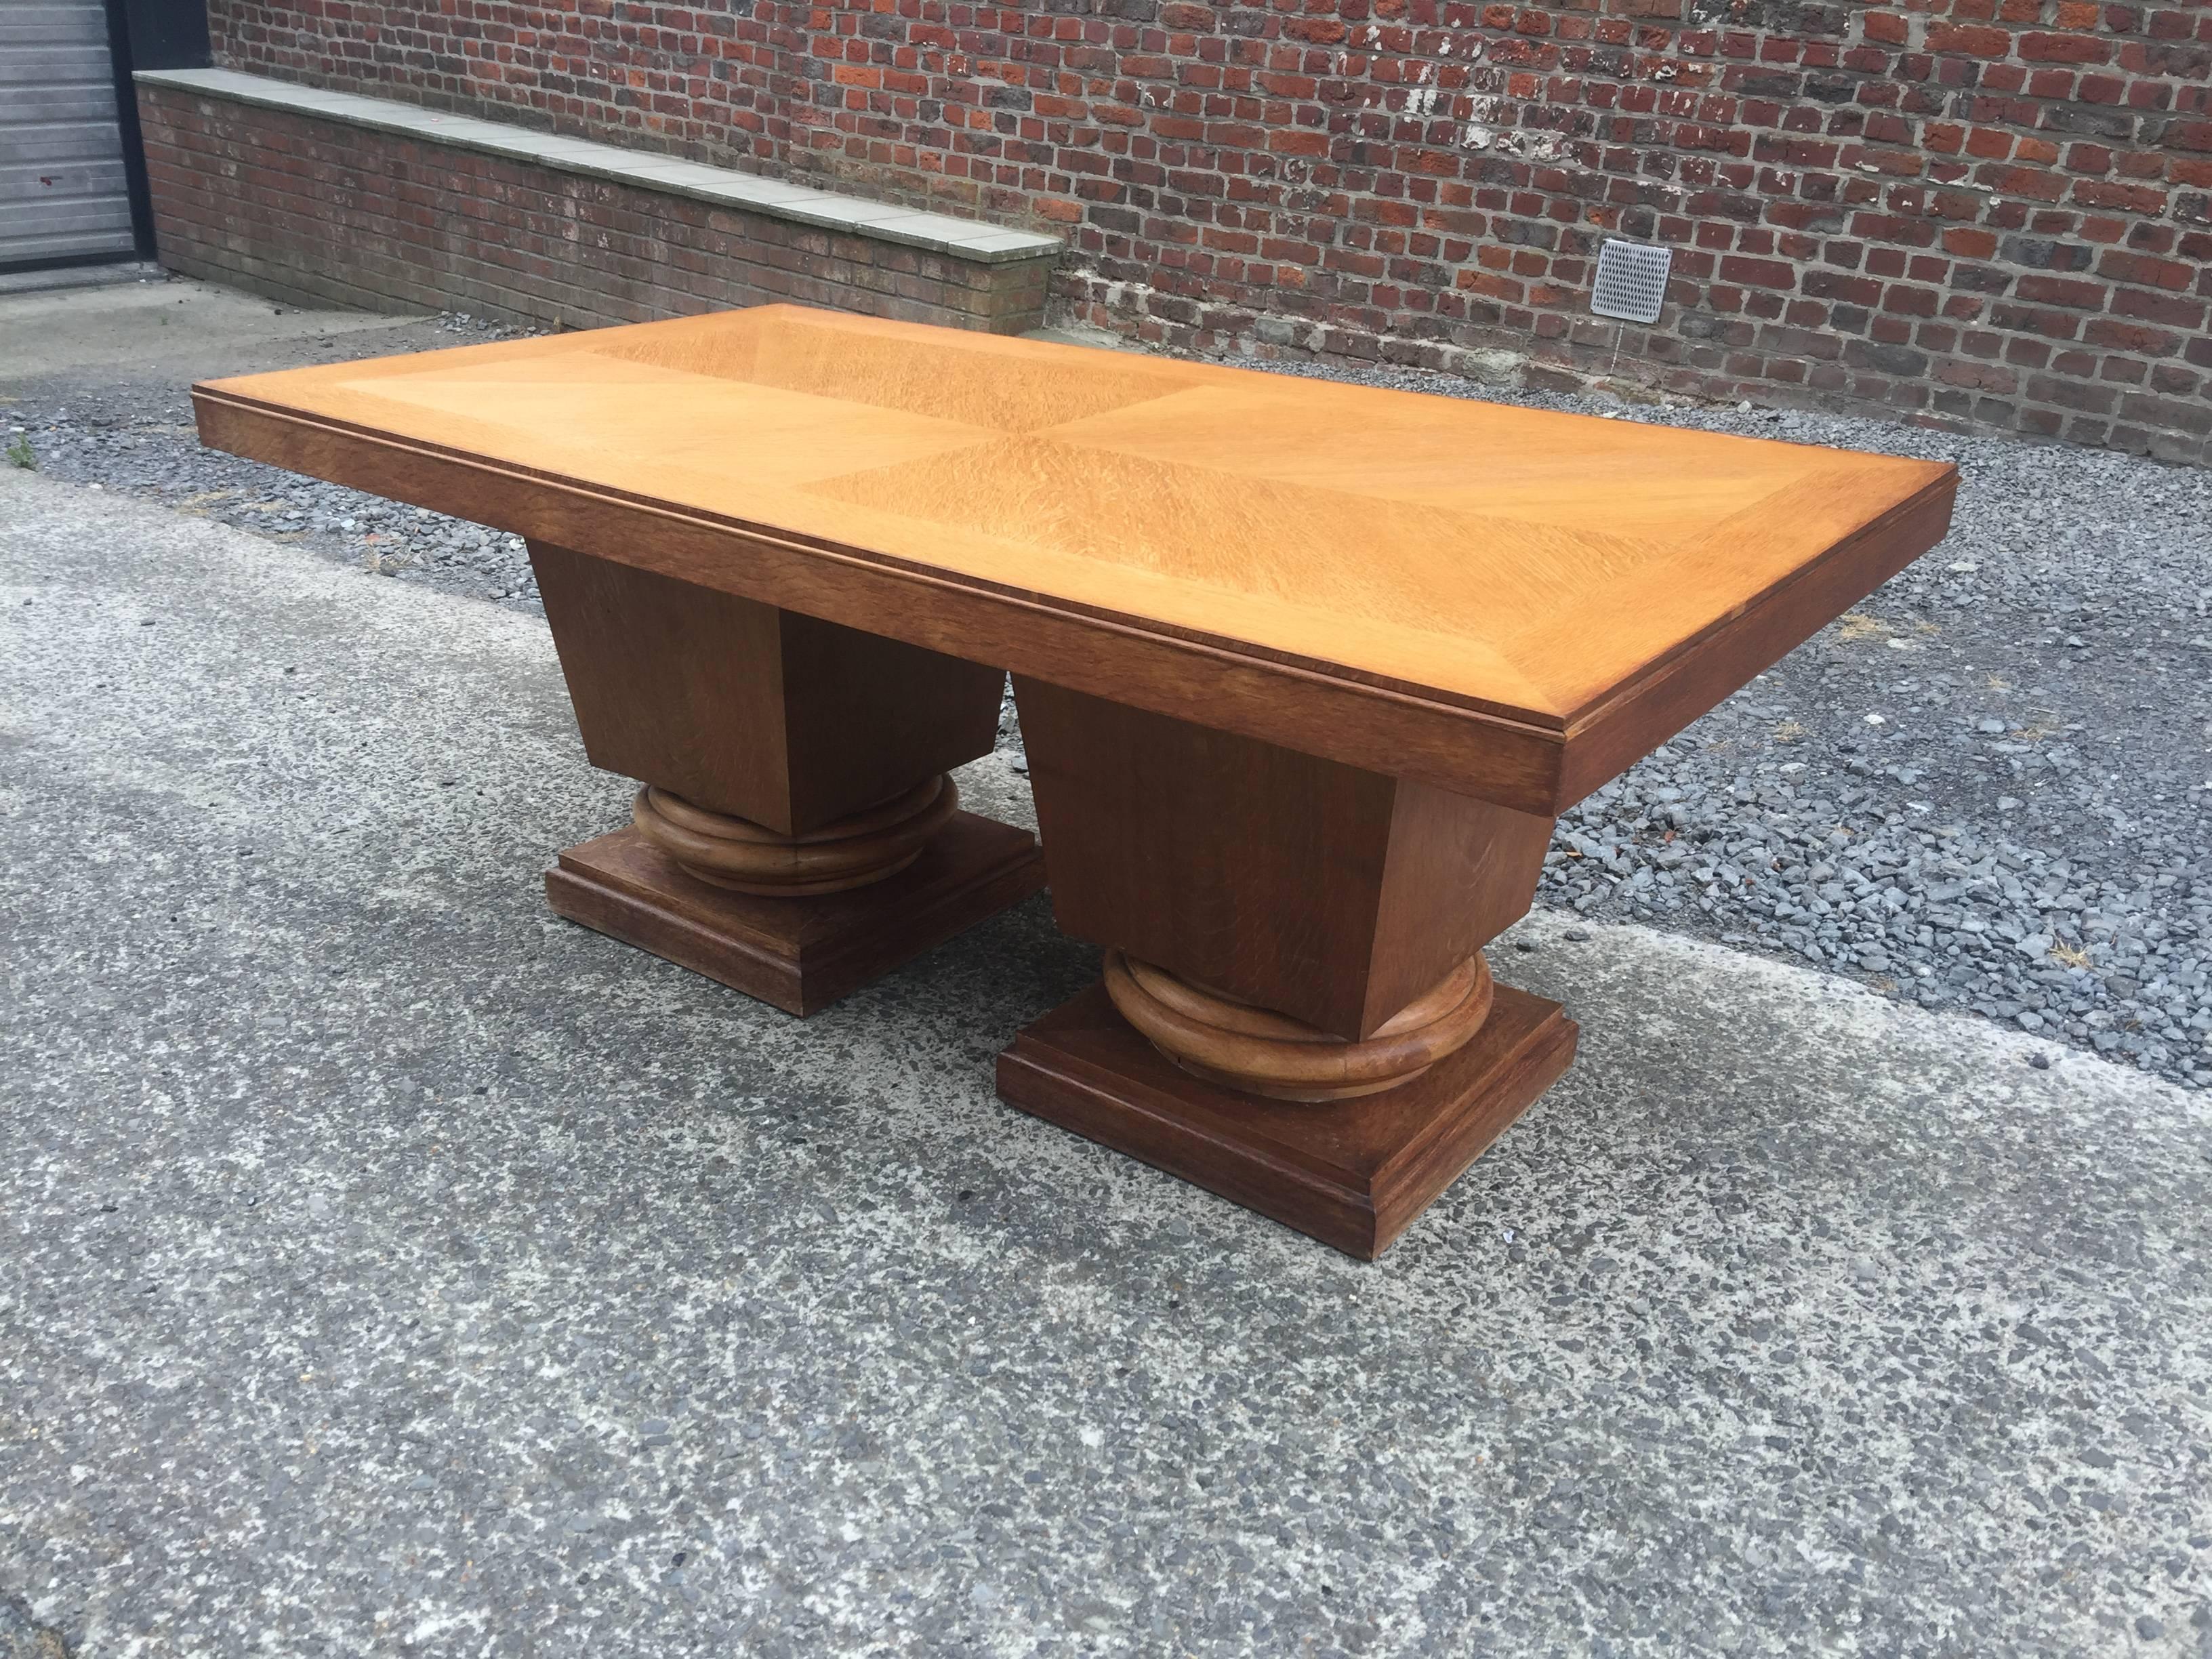 Jacques Klein, Art Deco oak table, circa 1939
Possibility to add two 70 cm leaves.